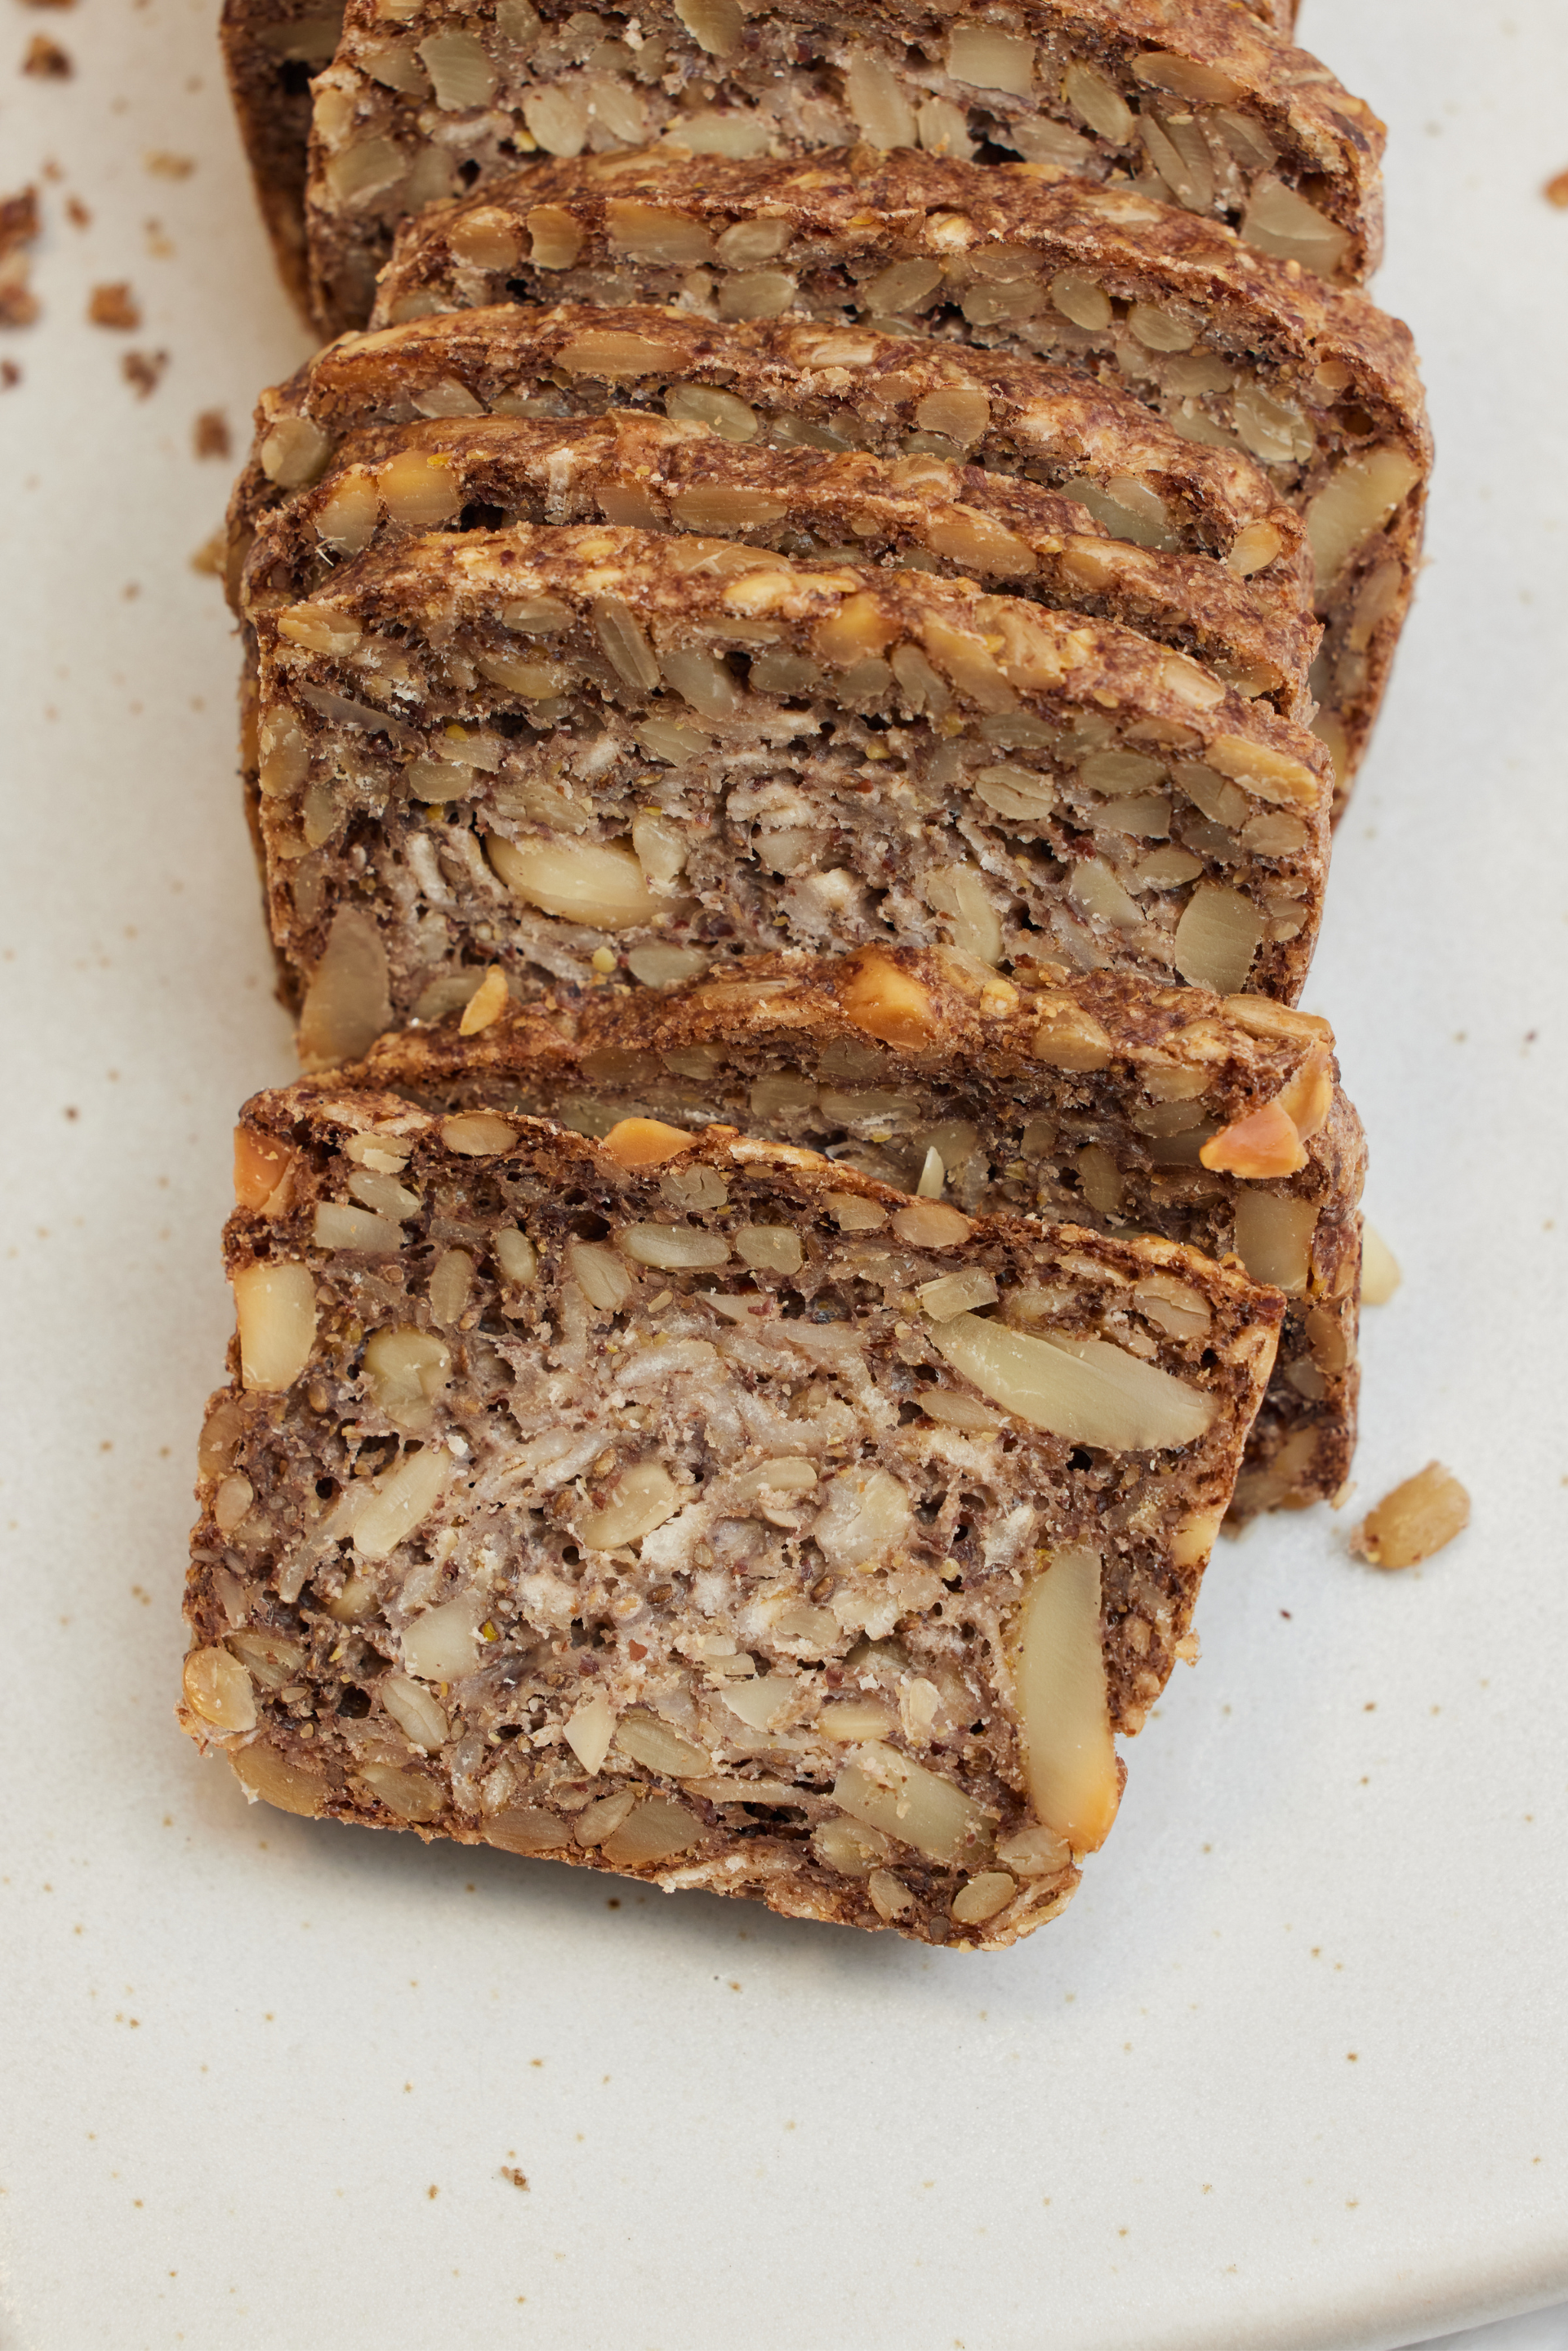 Gift: Superseed Bread Subscription - 1 year (2 loaves per month)